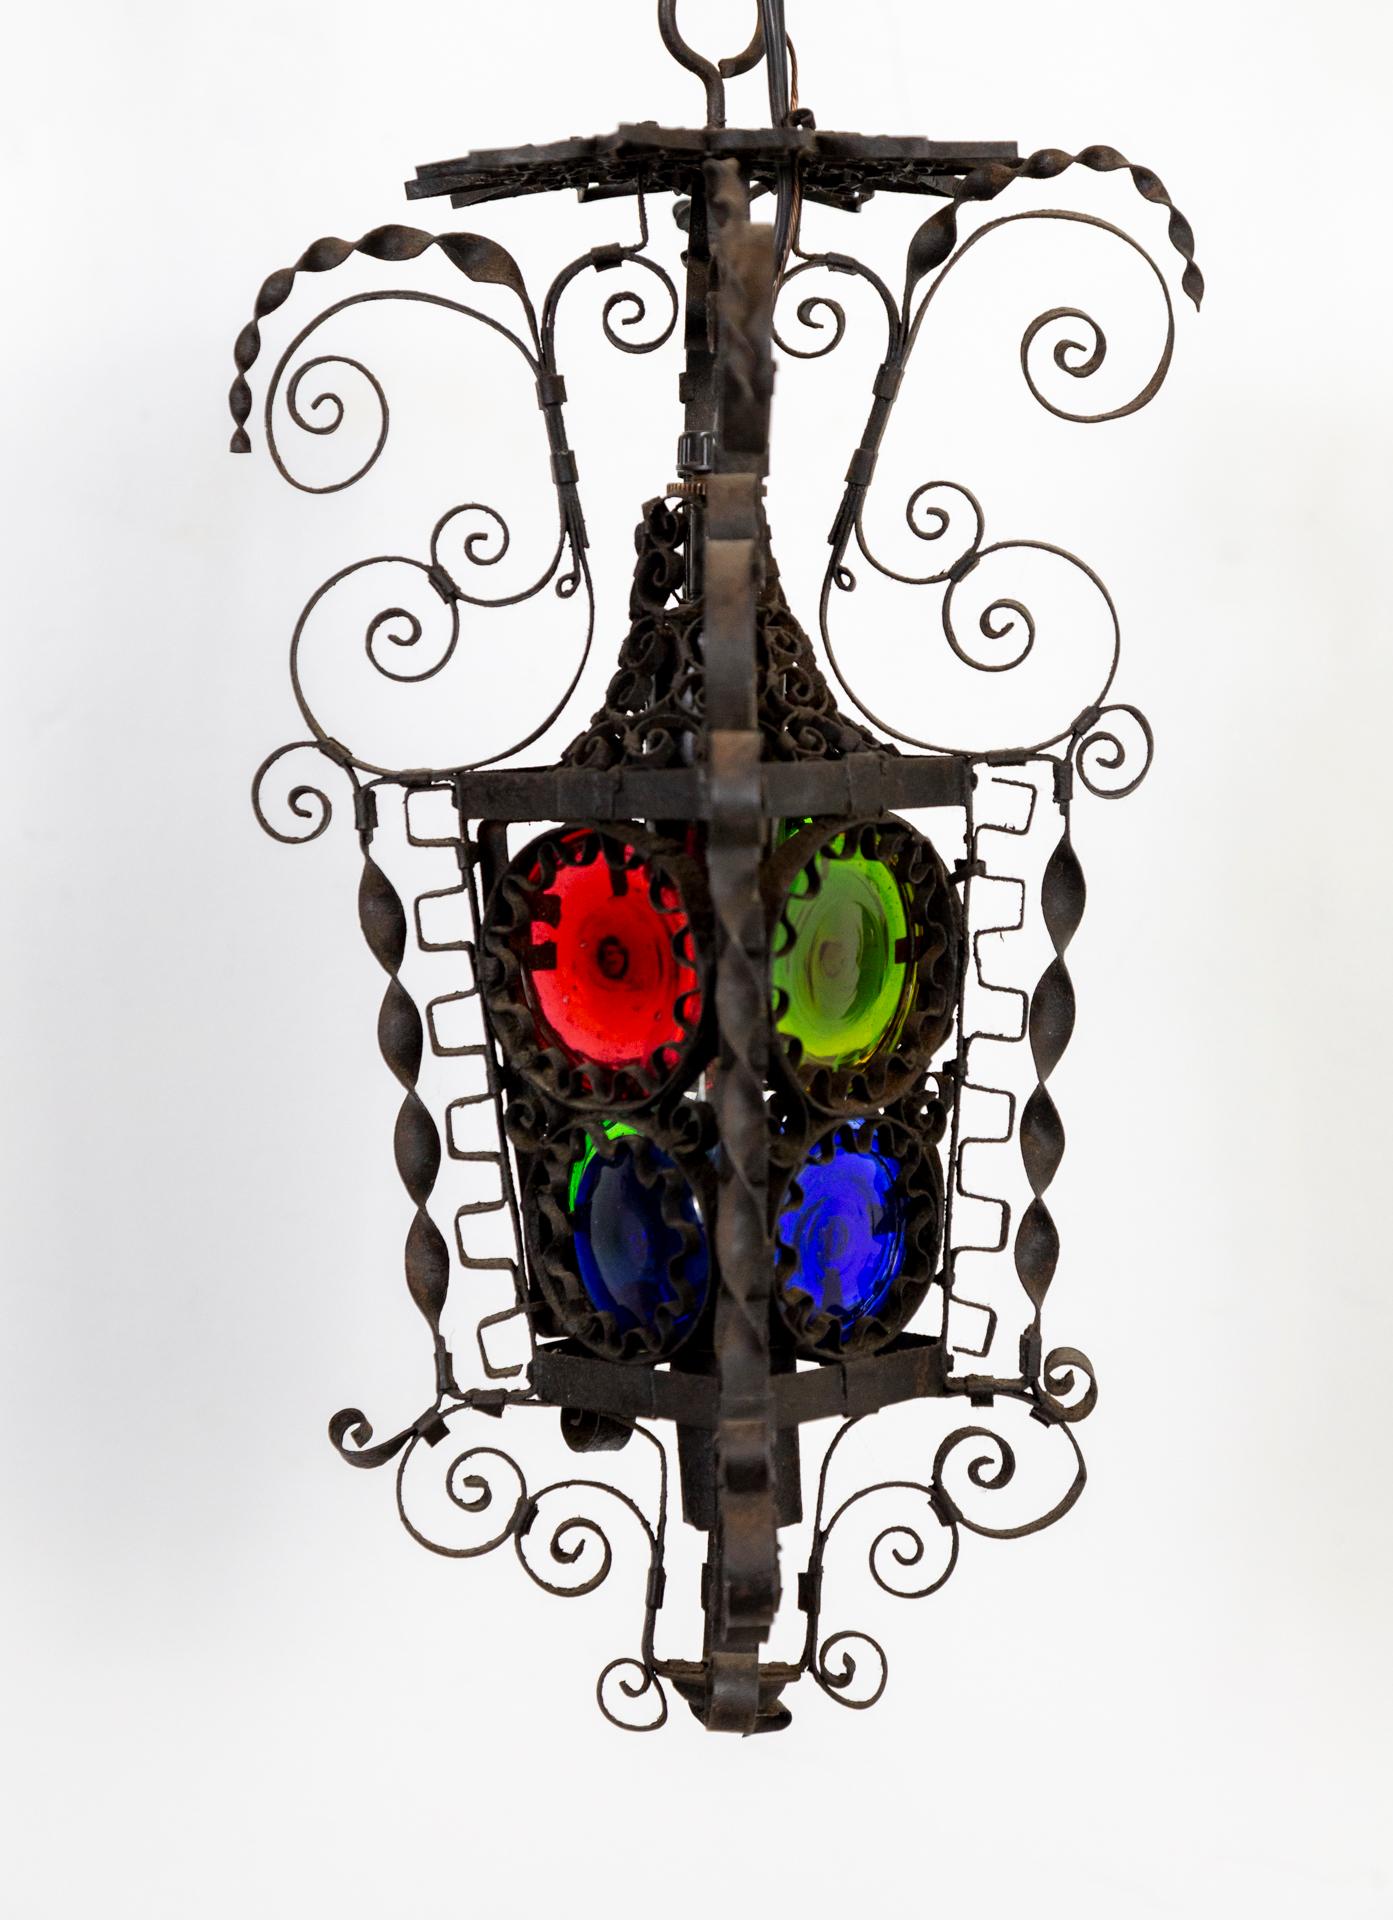 A lavishly decorated, 19th century, Italian, wall hanging lantern composed of complex, twisted and curled blackened iron. With a long, multi-dimensional filigree chain; and ornamented structure holding primary colored, handmade, glass disks. Newly